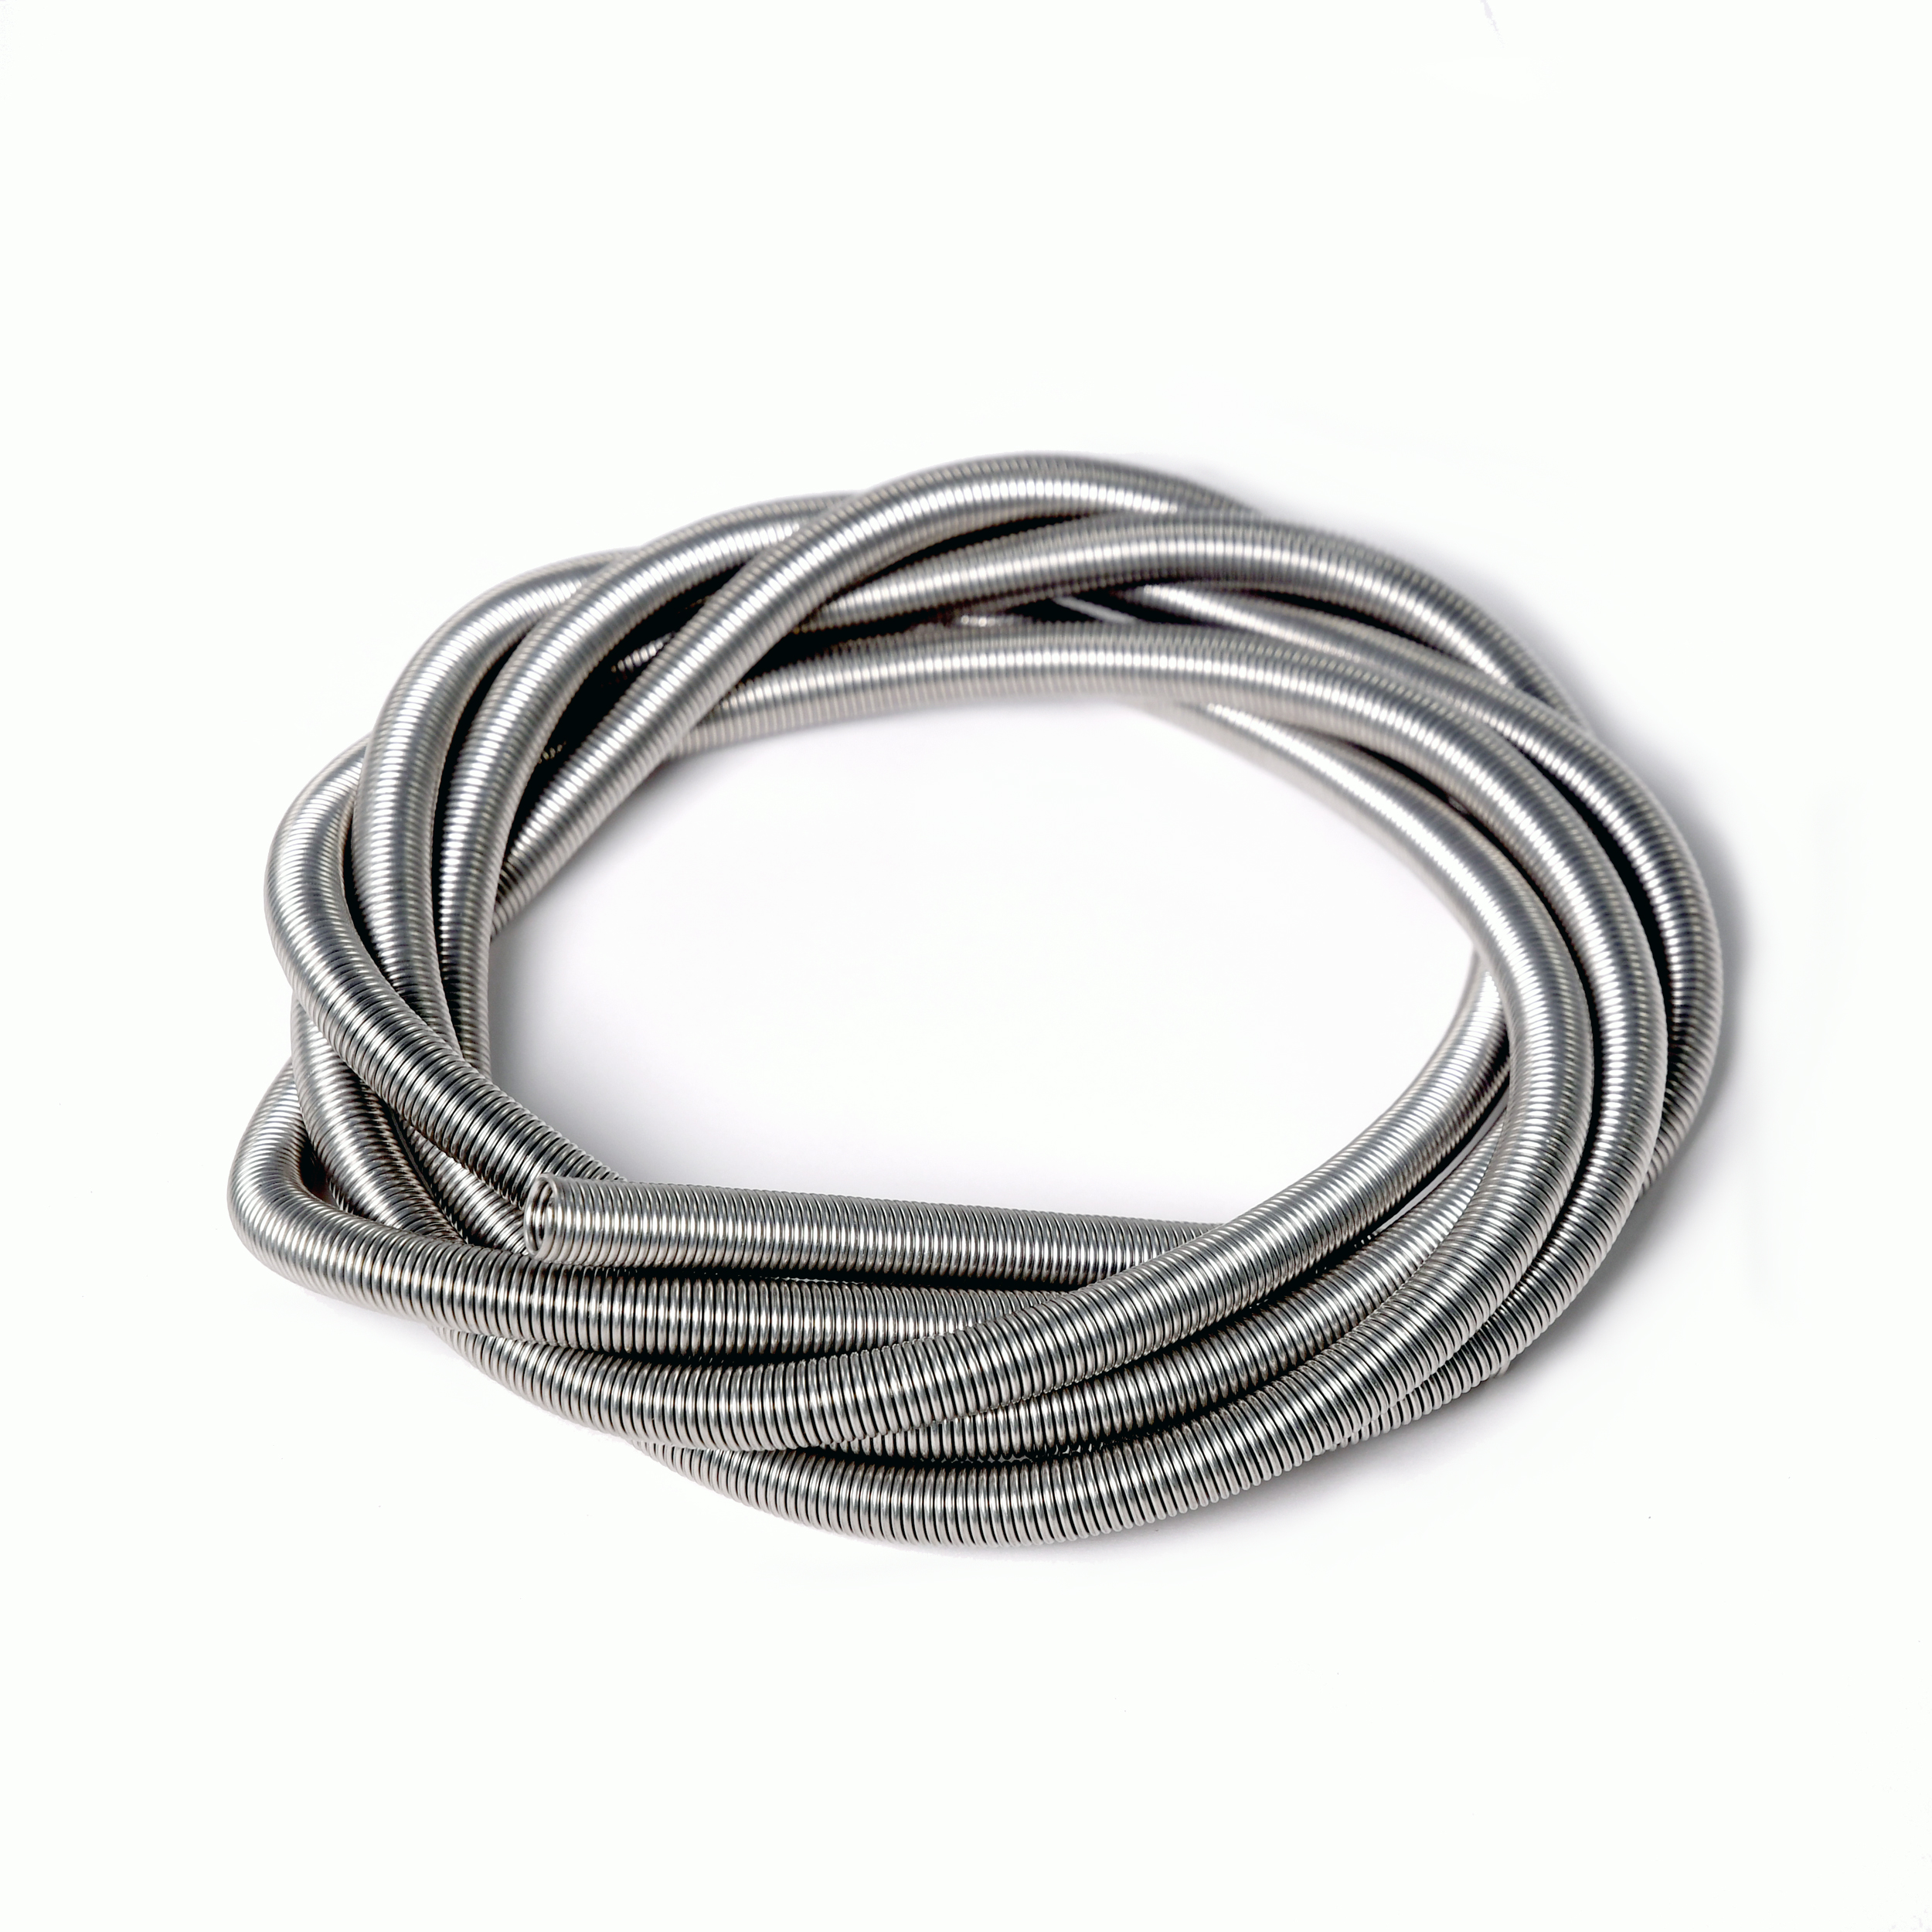 Details about   0.5mm-4mm 24AWG-6AWG Heating Resistor Wire Nichrome Wires for Heating Elements 